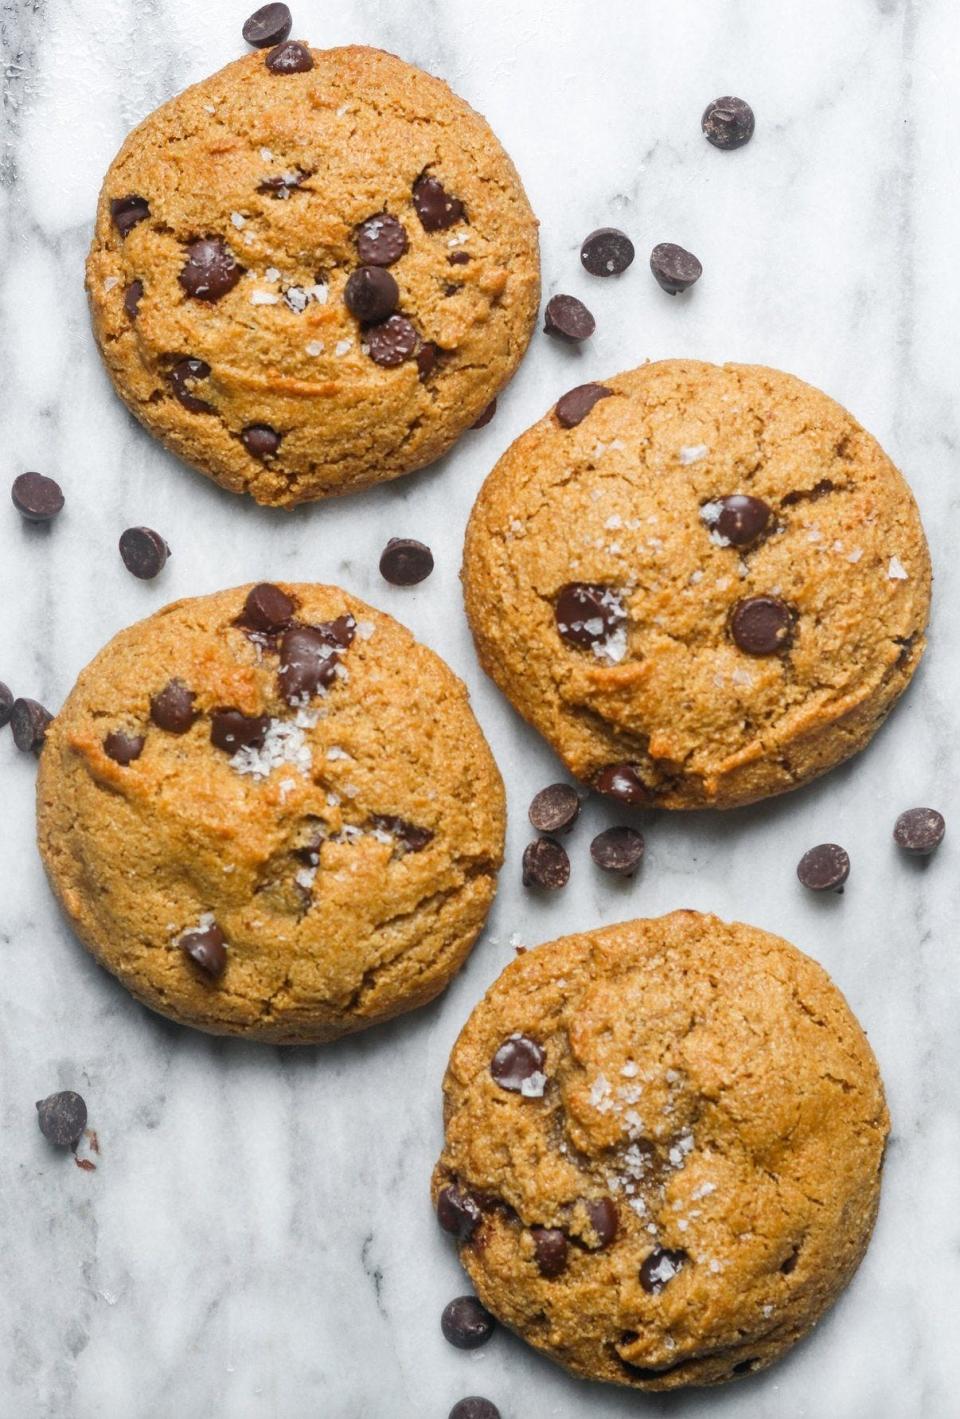 Sweet Addison’s cookies boast a grain-free, gluten-free, and soy-free recipe, crafted without refined sugar, artificial flavors, or preservatives.